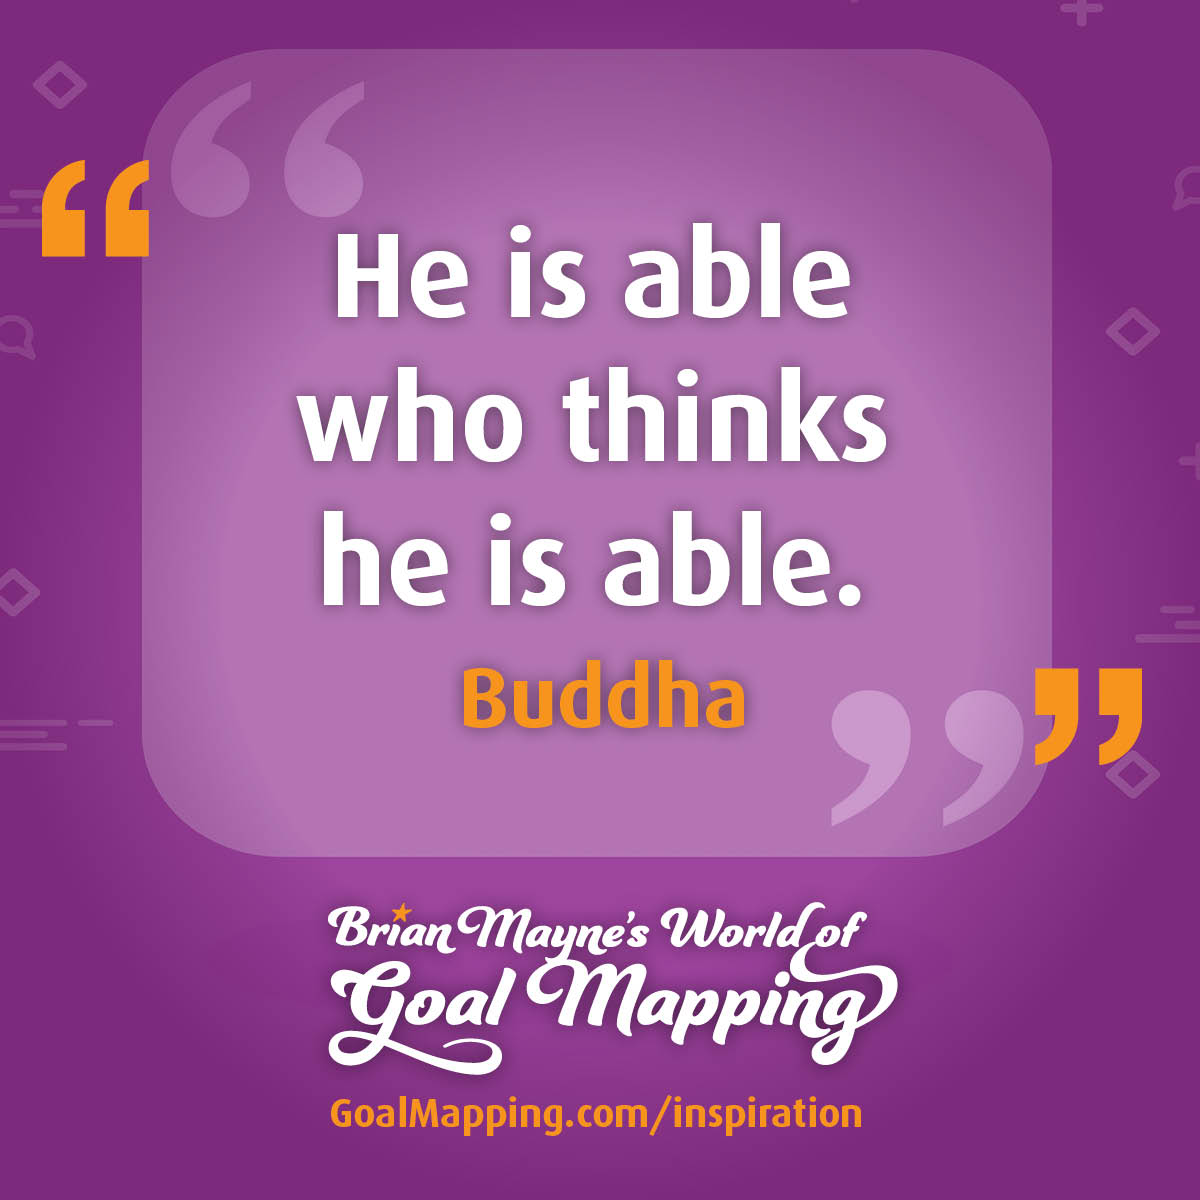 "He is able who thinks he is able." Buddha